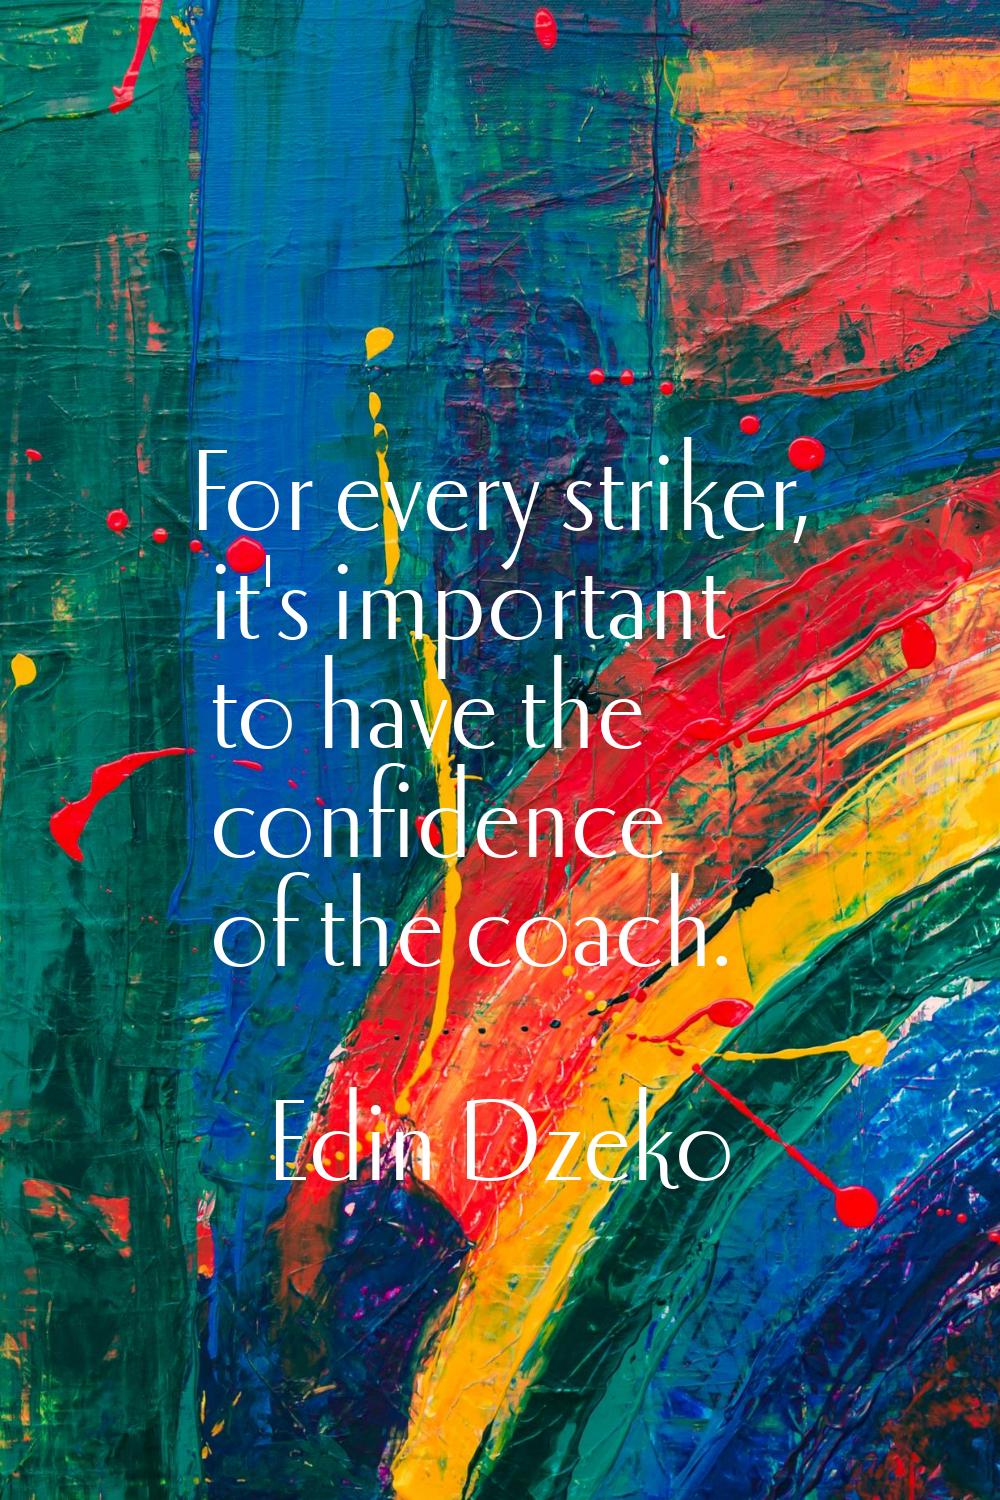 For every striker, it's important to have the confidence of the coach.